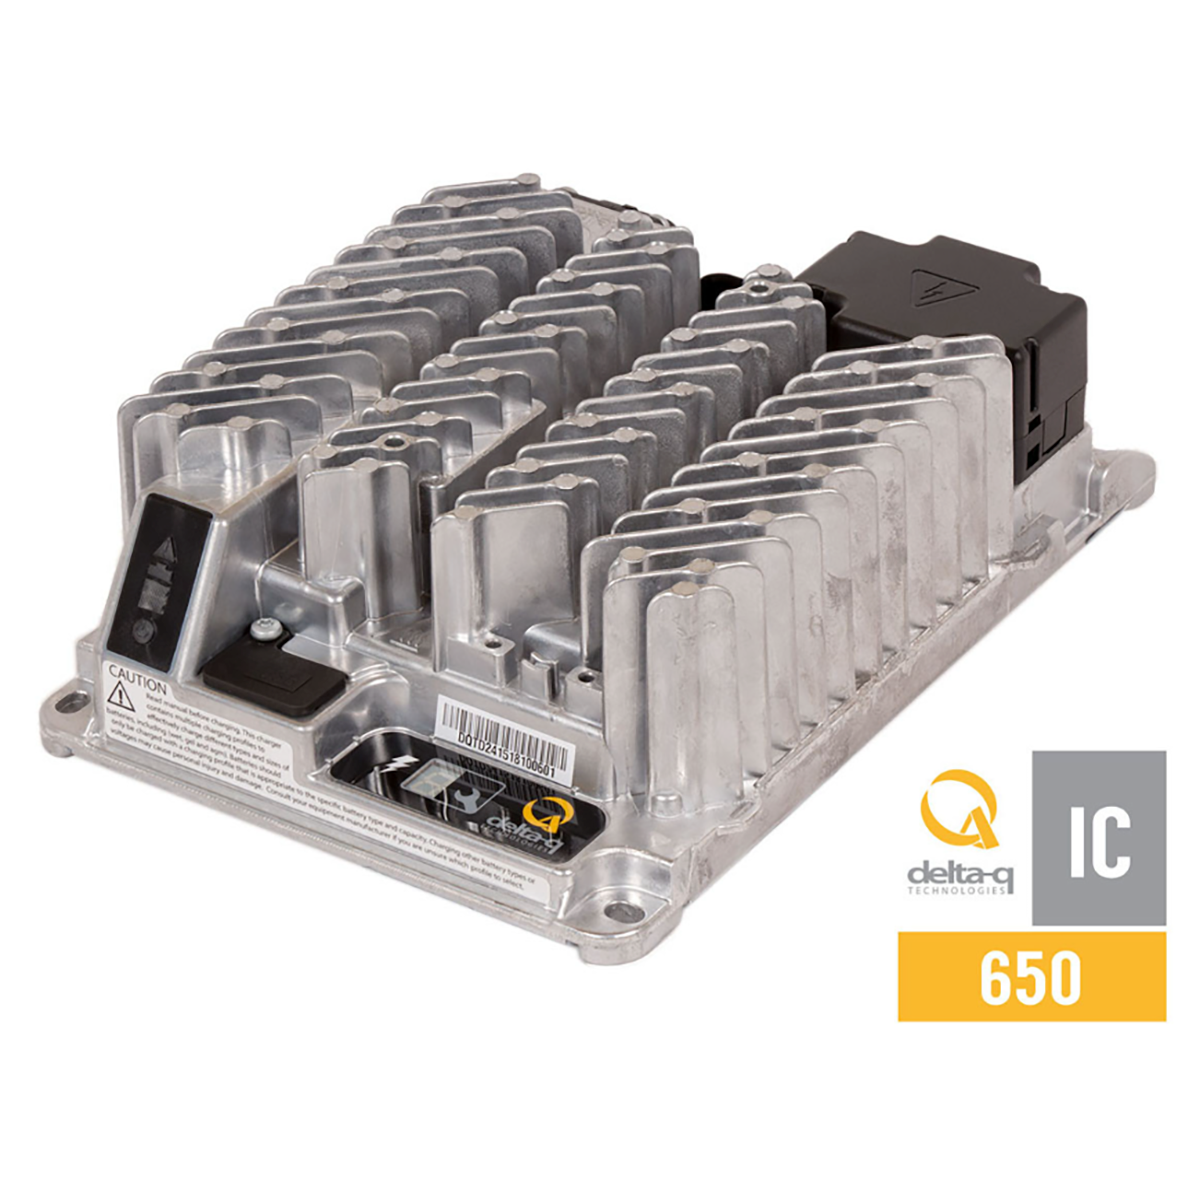 Delta-Q Ic650 Charger 36 Volt, 18 Amp, Direct Connection With Interlock Ê_Delta-Q Ic Series Battery Charger User Manual